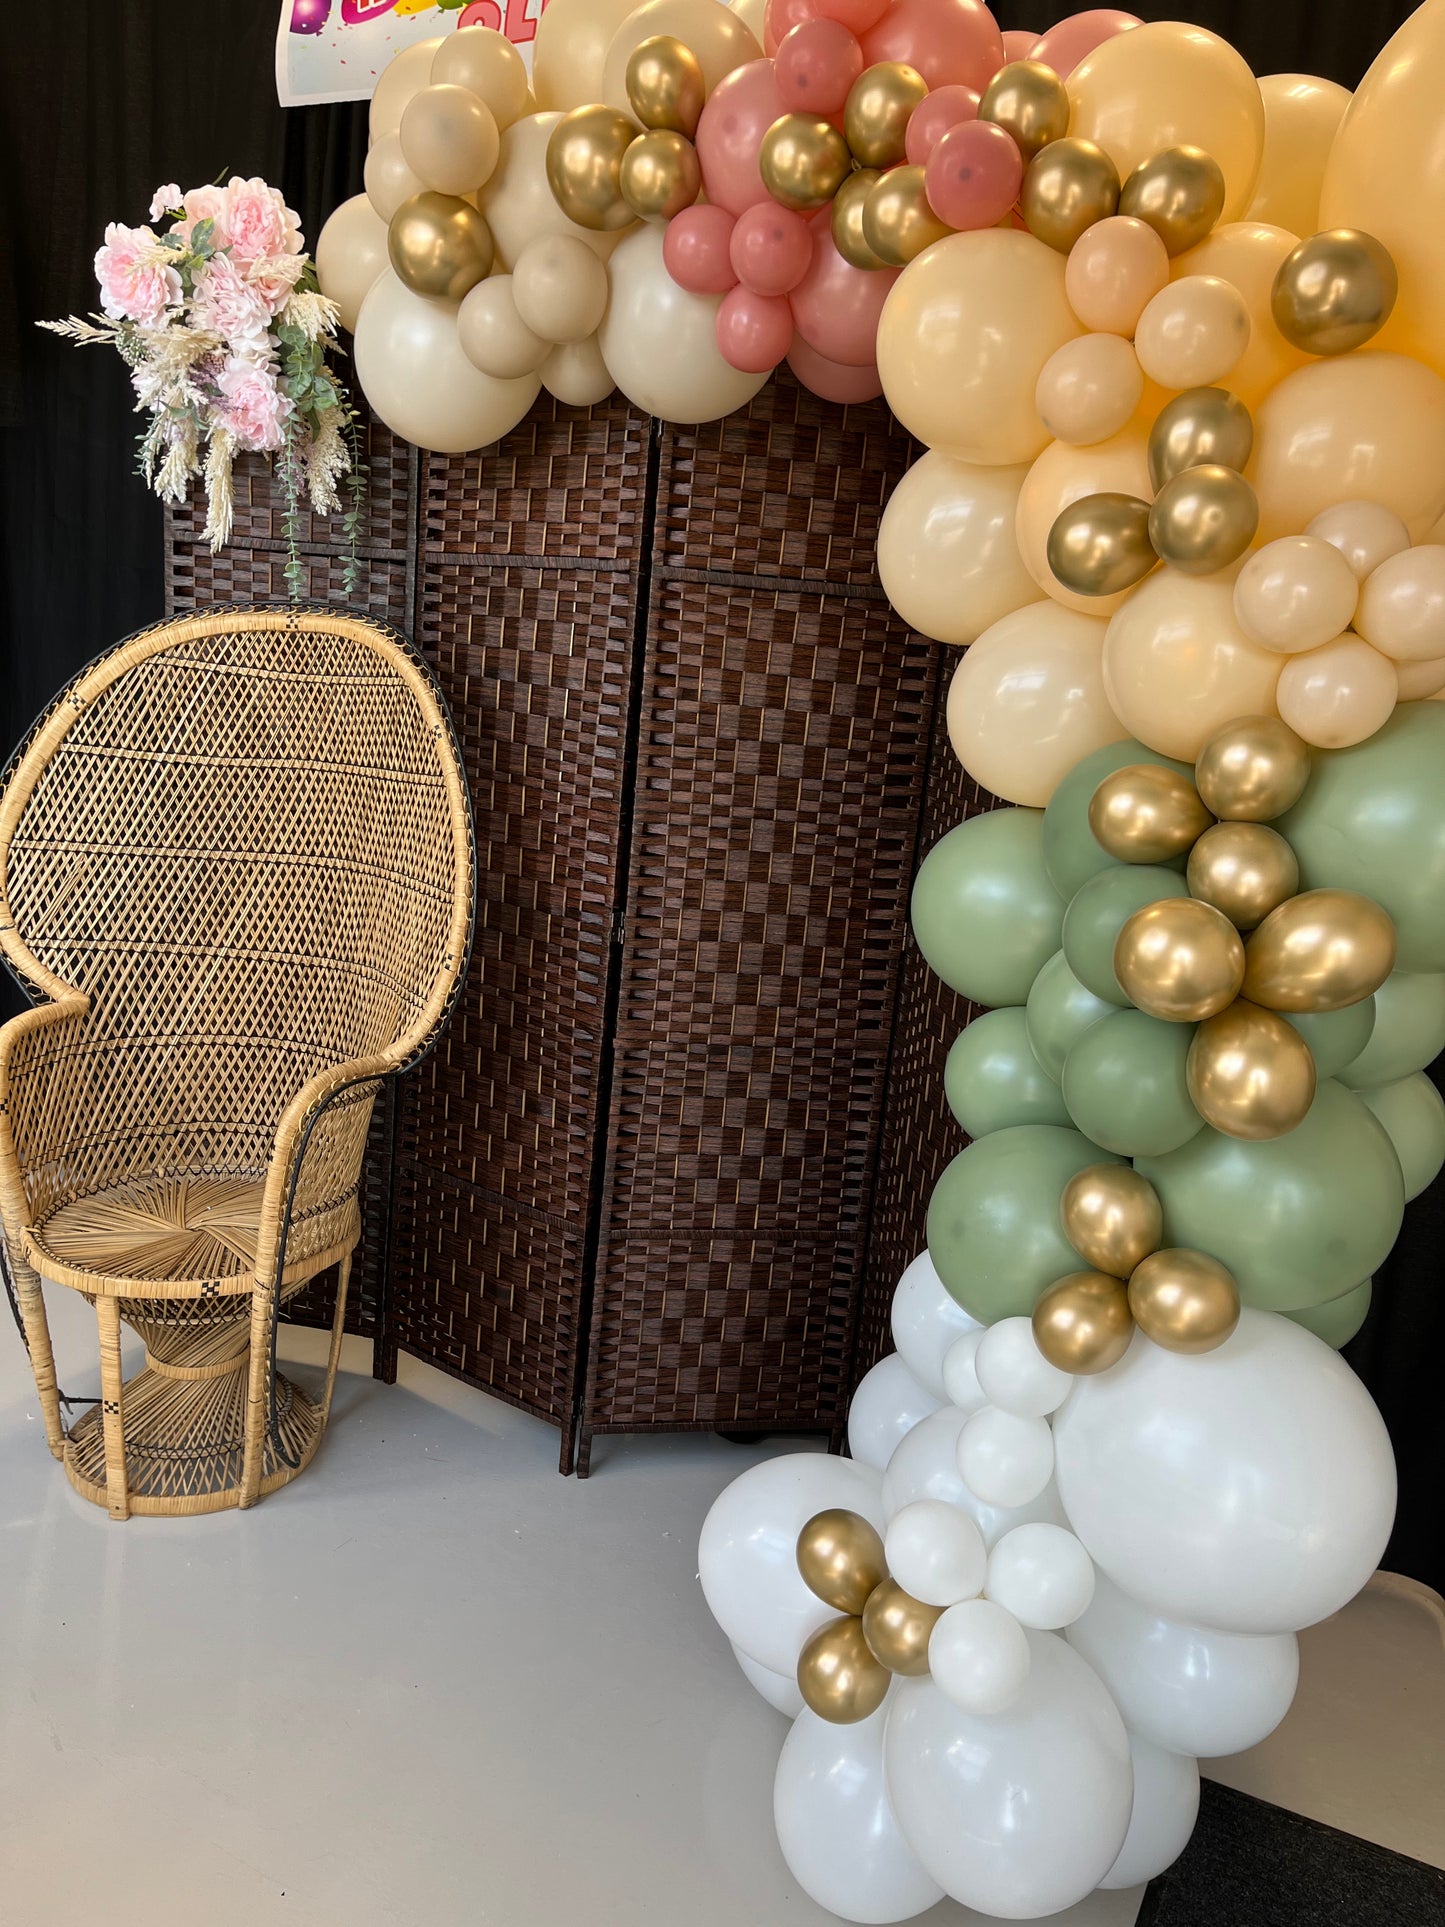 Backdrop for pictures with balloons